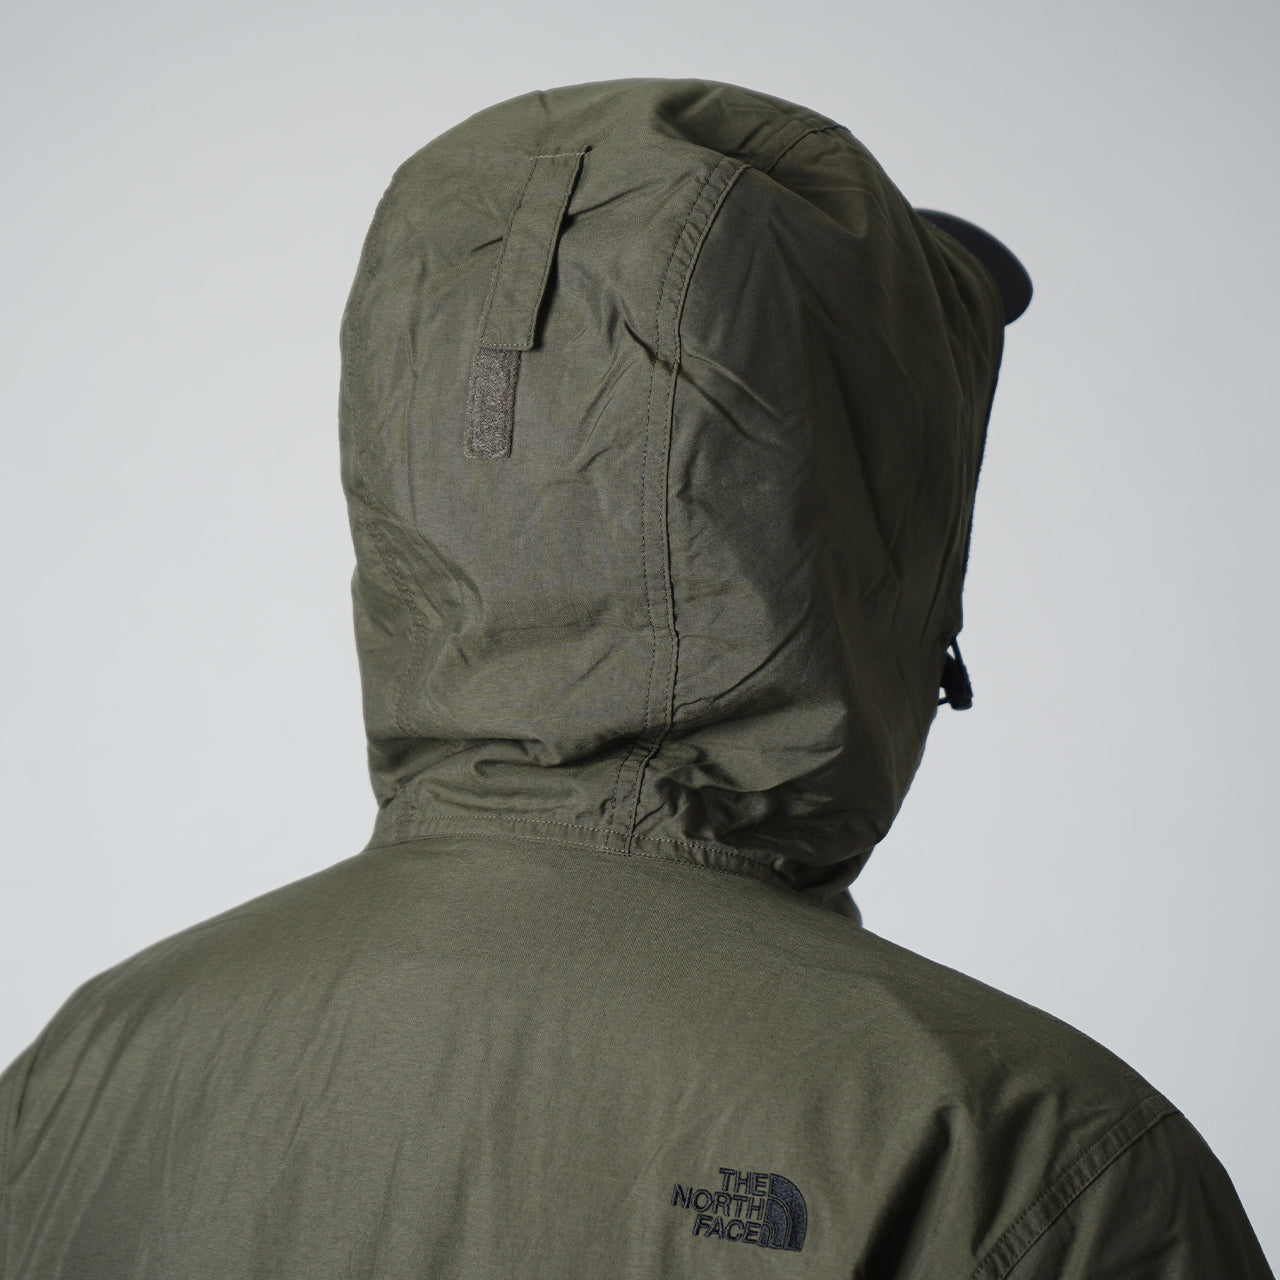 THE NORTH FACE ノースフェイス コンパクト ノマド ジャケット Compact Nomad Jacket NP72330【送料無料】